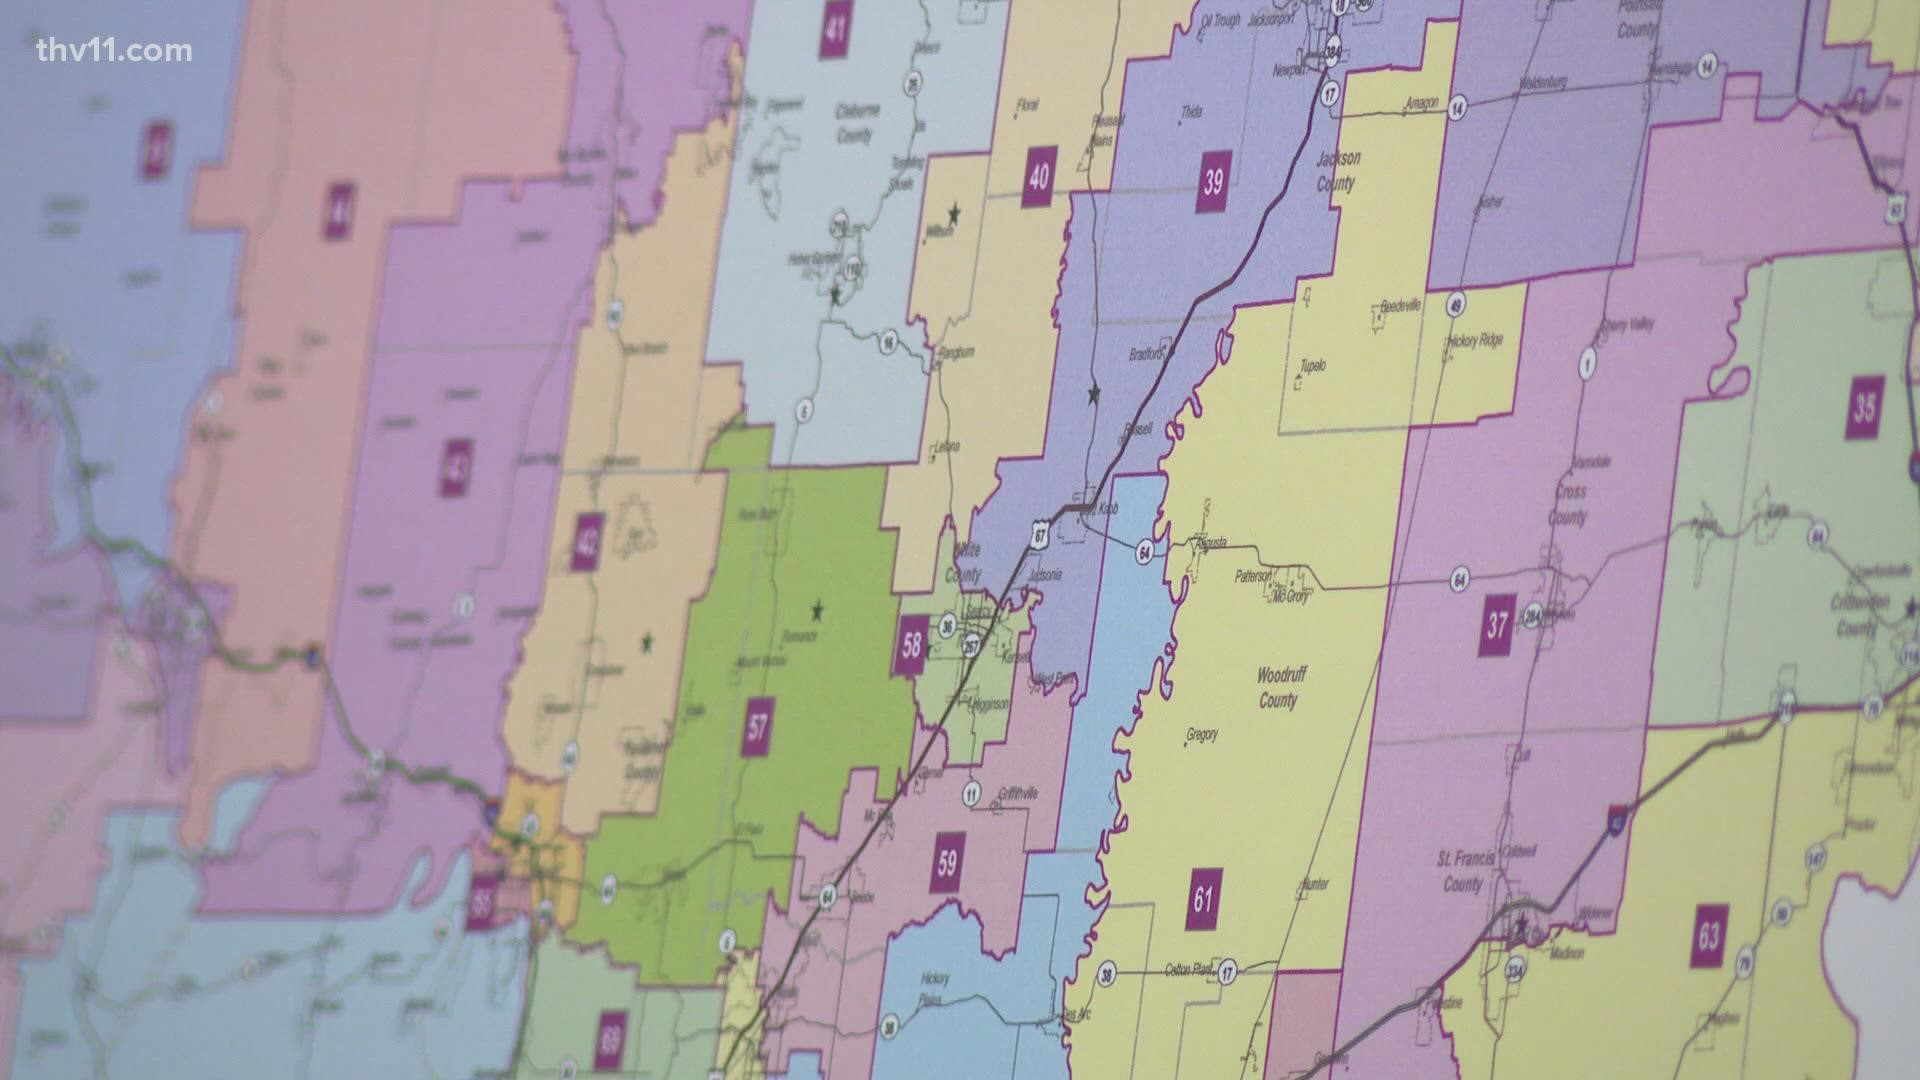 A redistricting panel has approved new maps for all of Arkansas' state legislative seats.